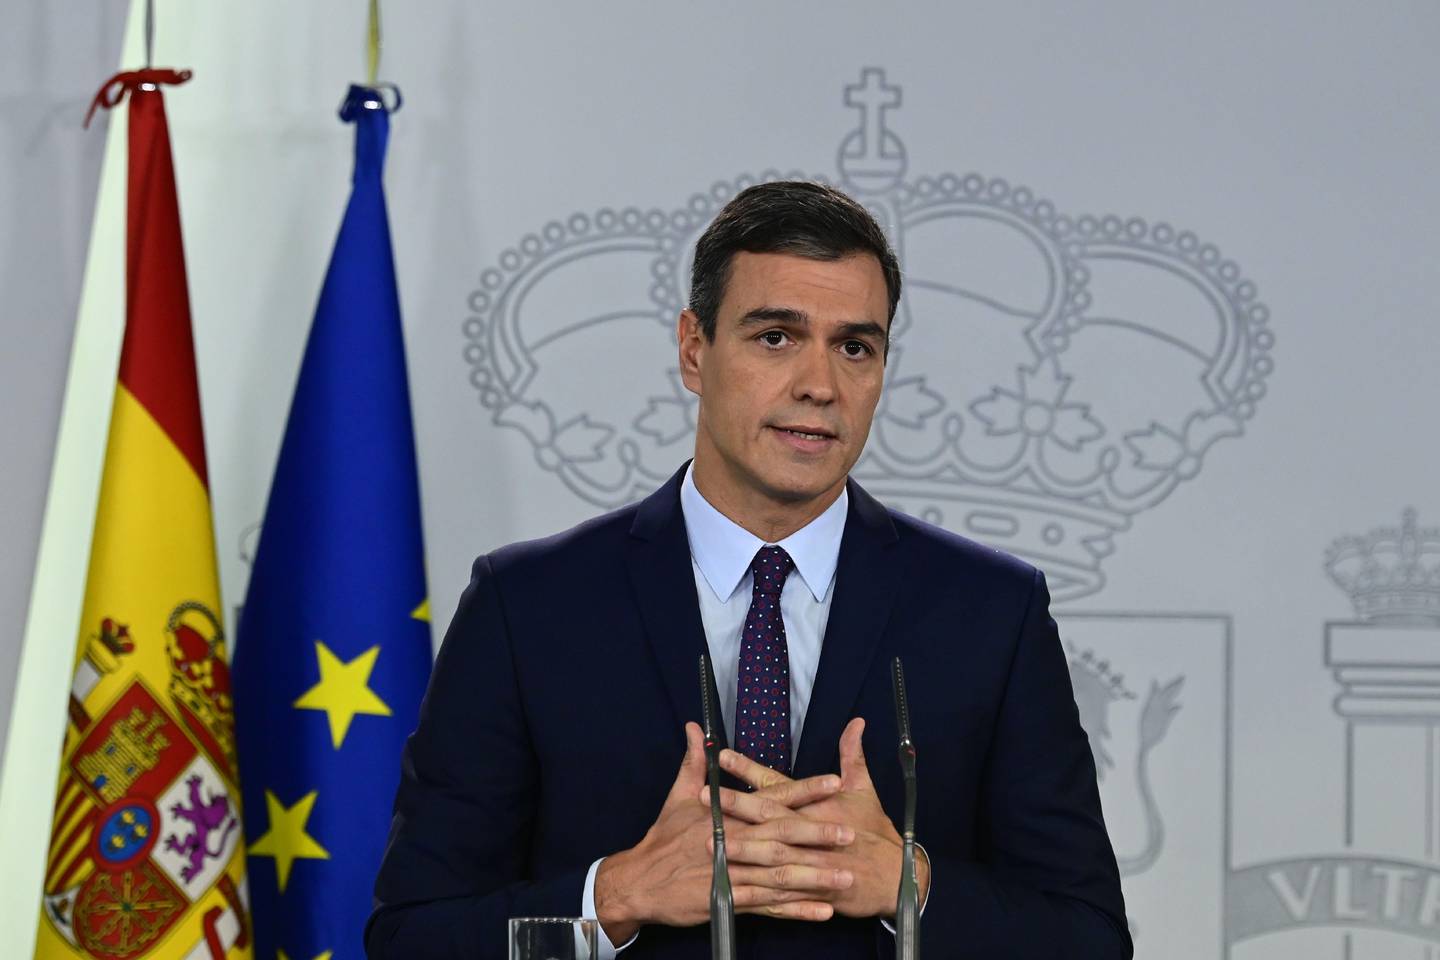 Spanish Prime Minister Pedro Sanchez gives a speech on October 14, 2019 in Madrid, after Spain's Supreme Court sentenced nine Catalan leaders to prison terms ranging from nine to 13 years for sedition and misuse of public funds for their role in a failed 2017 independence bid. (Photo by JAVIER SORIANO / AFP)